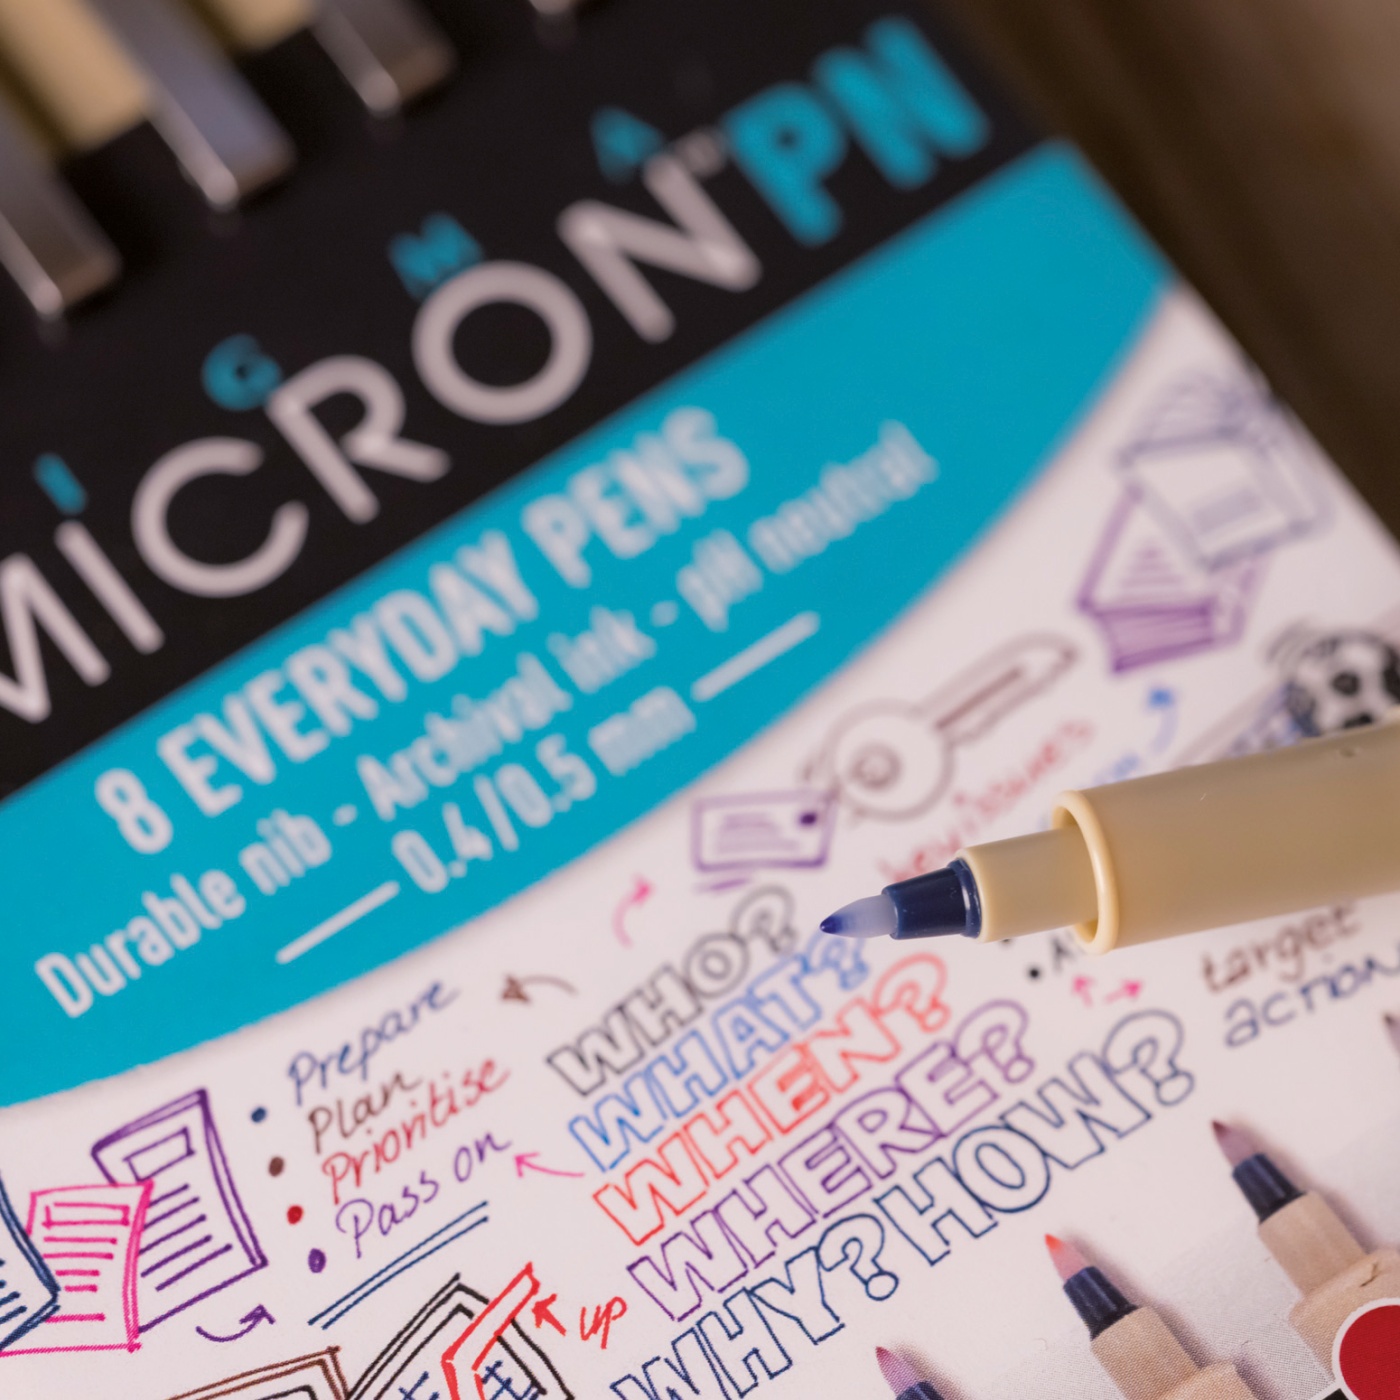 Pigma Micron PN 8-pack in the group Pens / Product series / Pigma Micron at Pen Store (103527)